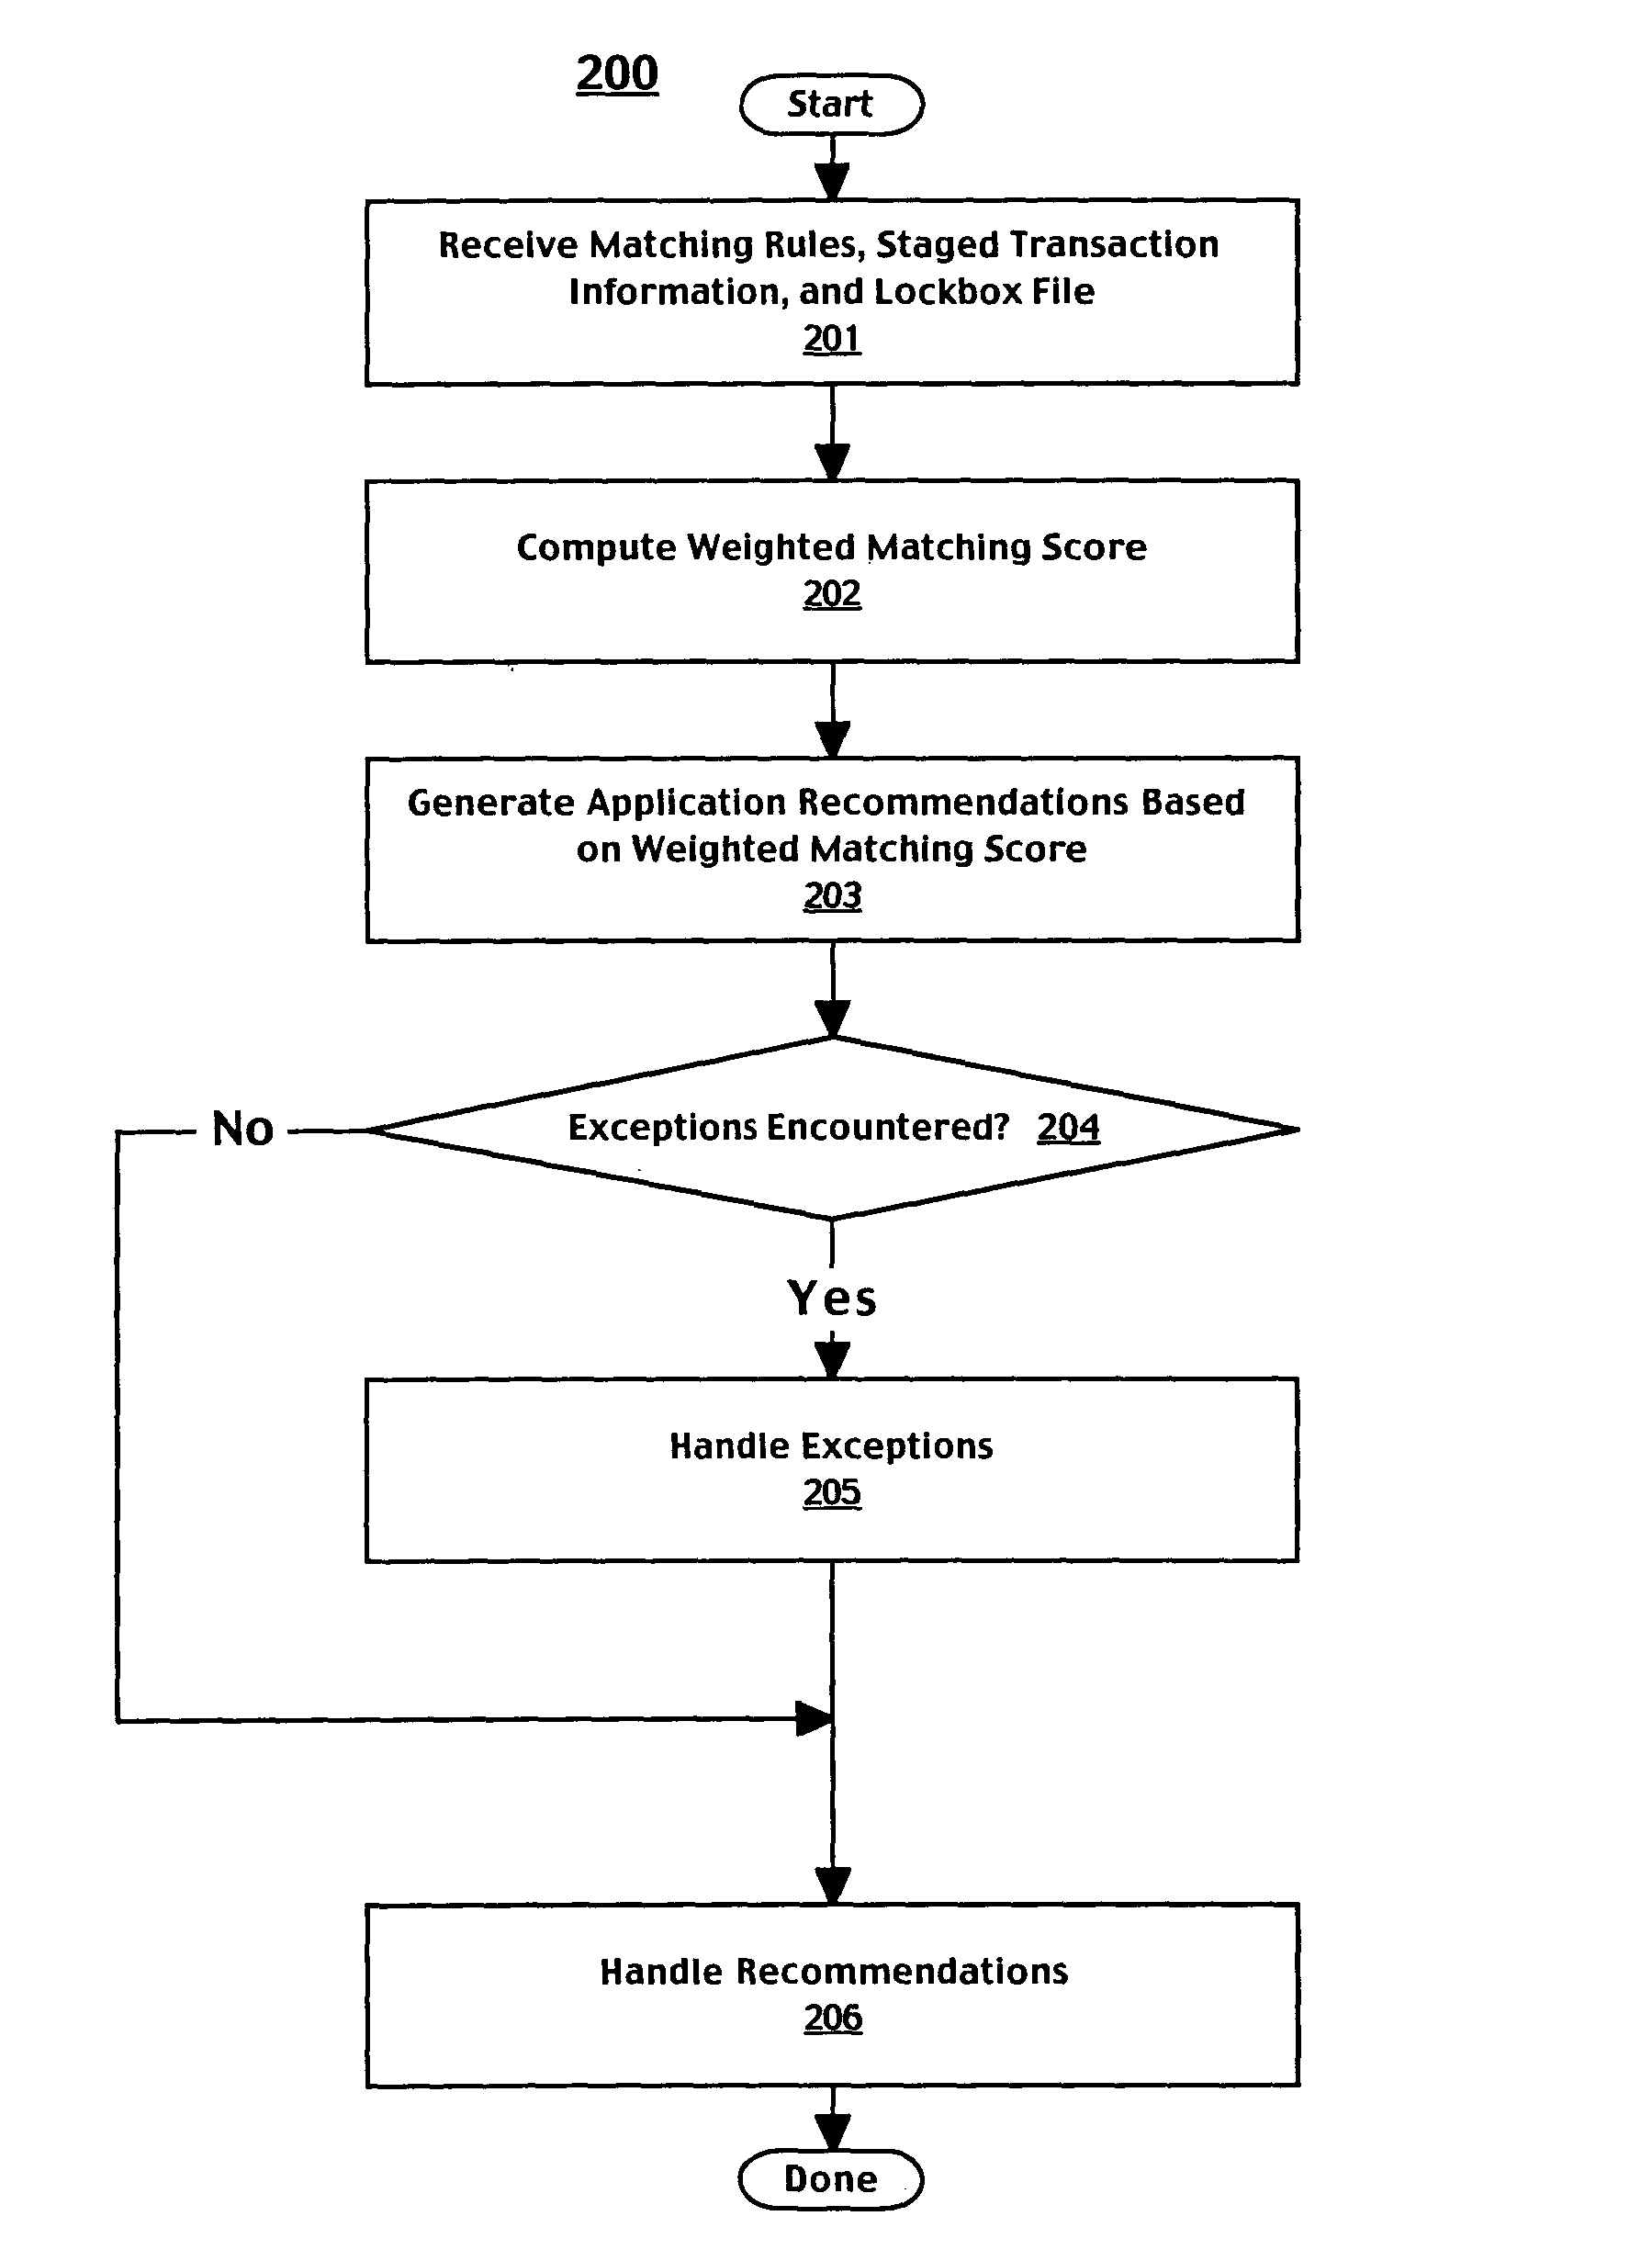 Method and system for matching remittances to transactions based on weighted scoring and fuzzy logic